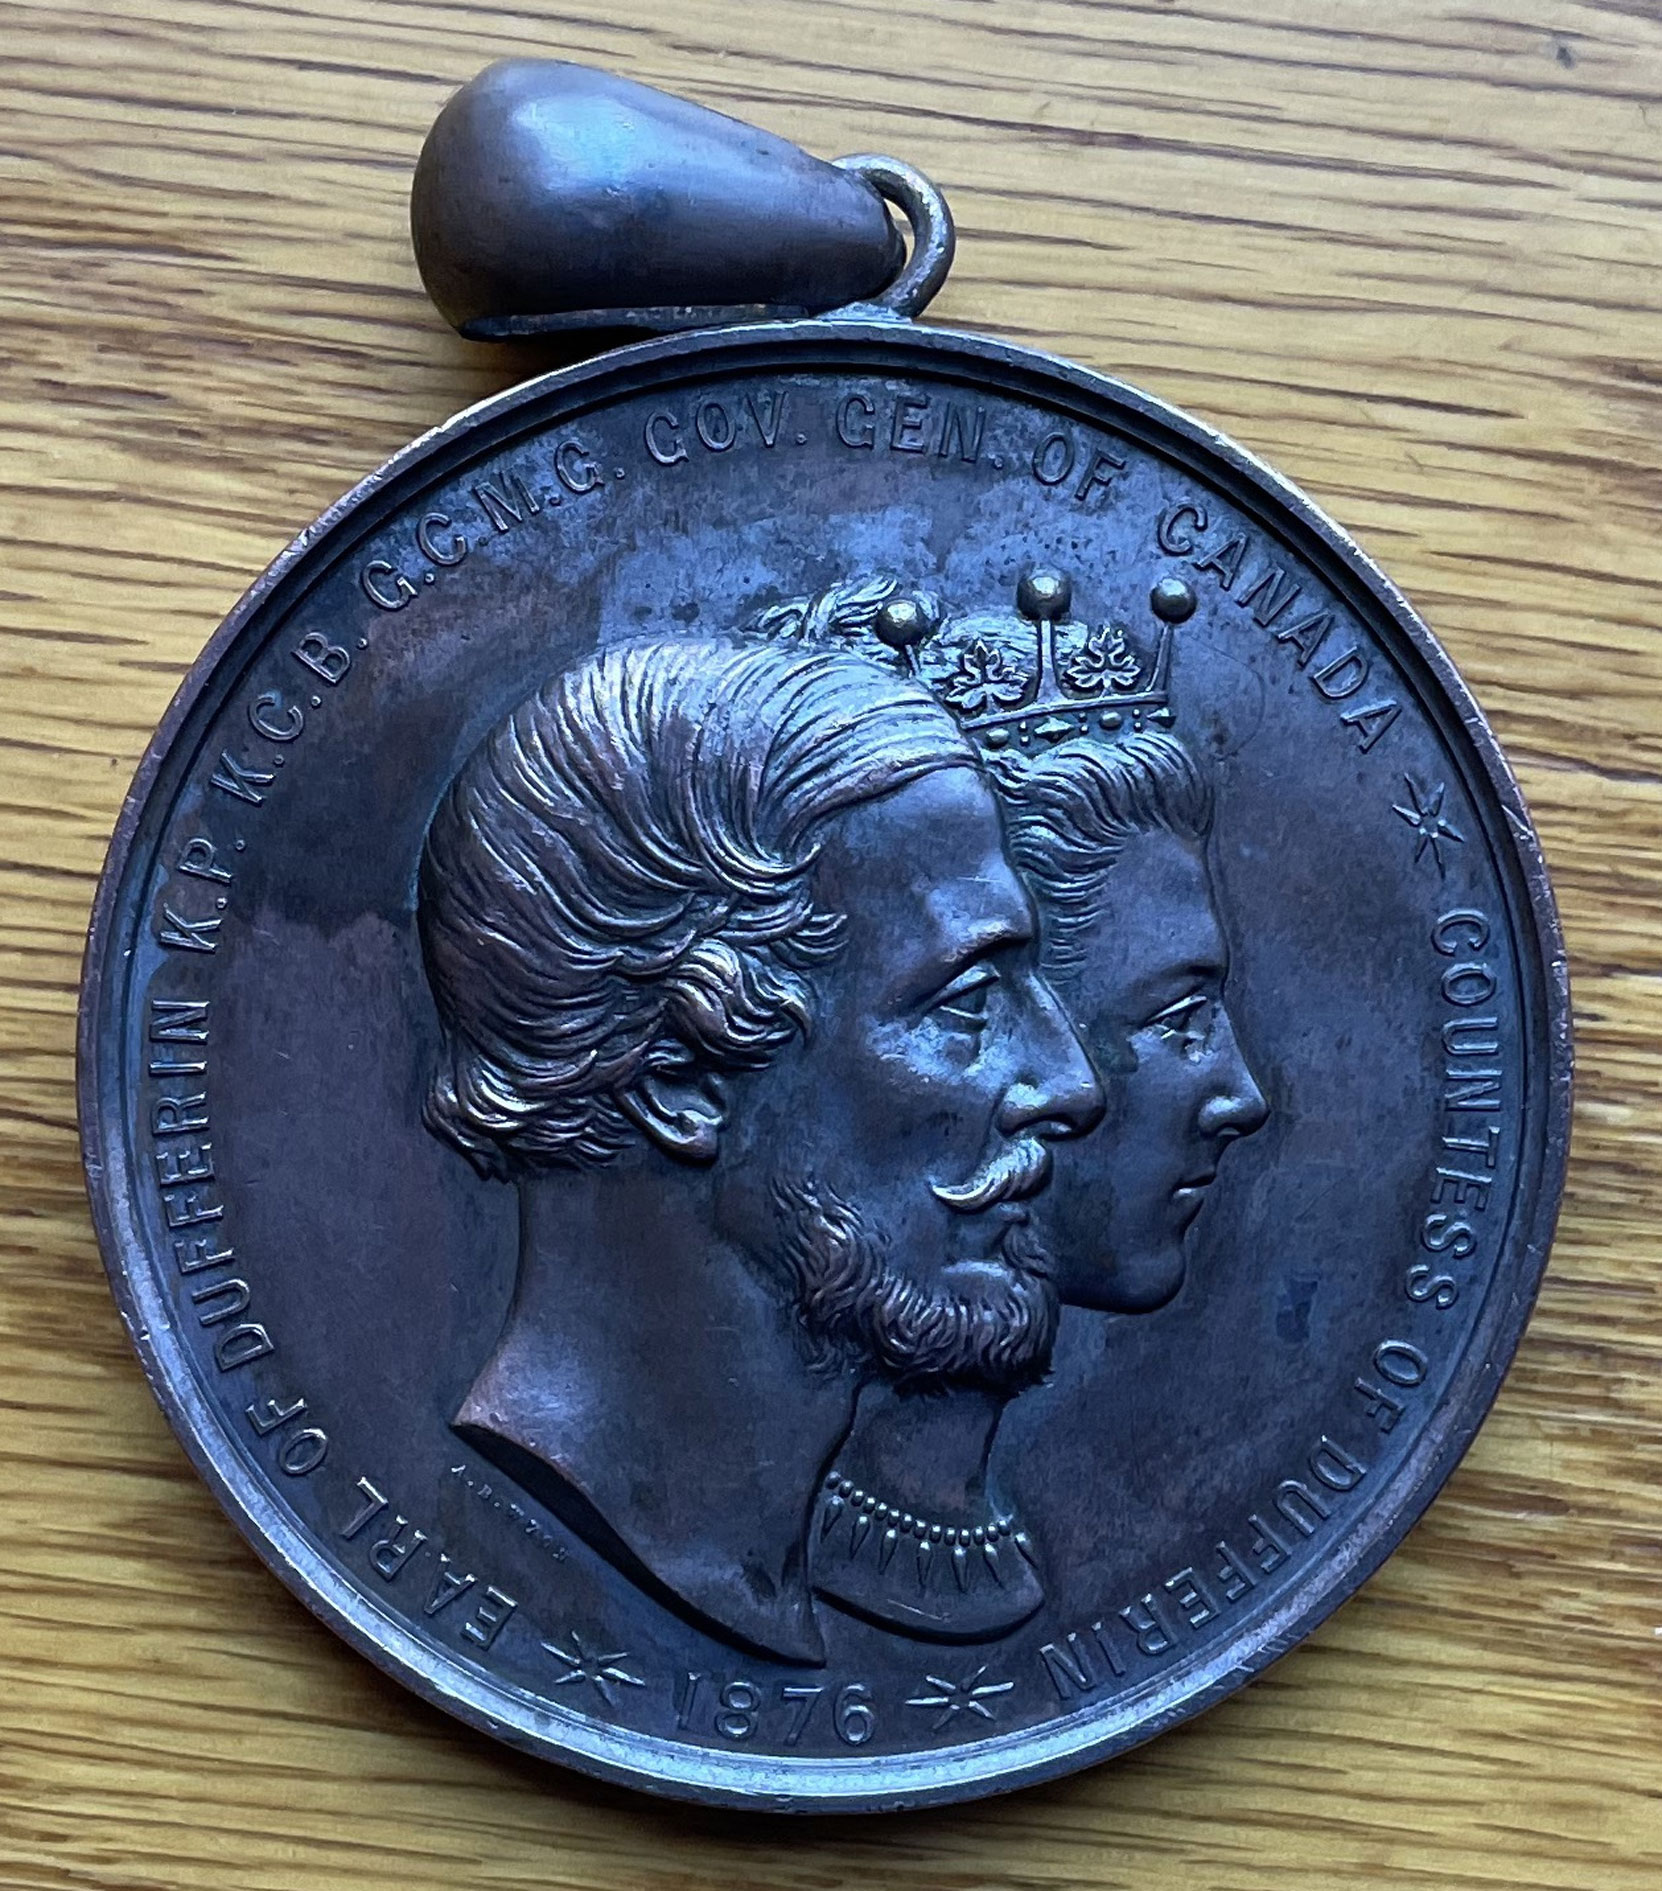 An example of the rear view of the medal presented by Lord and Lady Dufferin, possibly to the Brantford Young Ladies College student who achieved the highest academic score for the school year. This particular medal was presented to Miss Nora V. Wallace of Brantford, Ontario in 1878. (Courtesy of David Pease - private collection, used with permission)